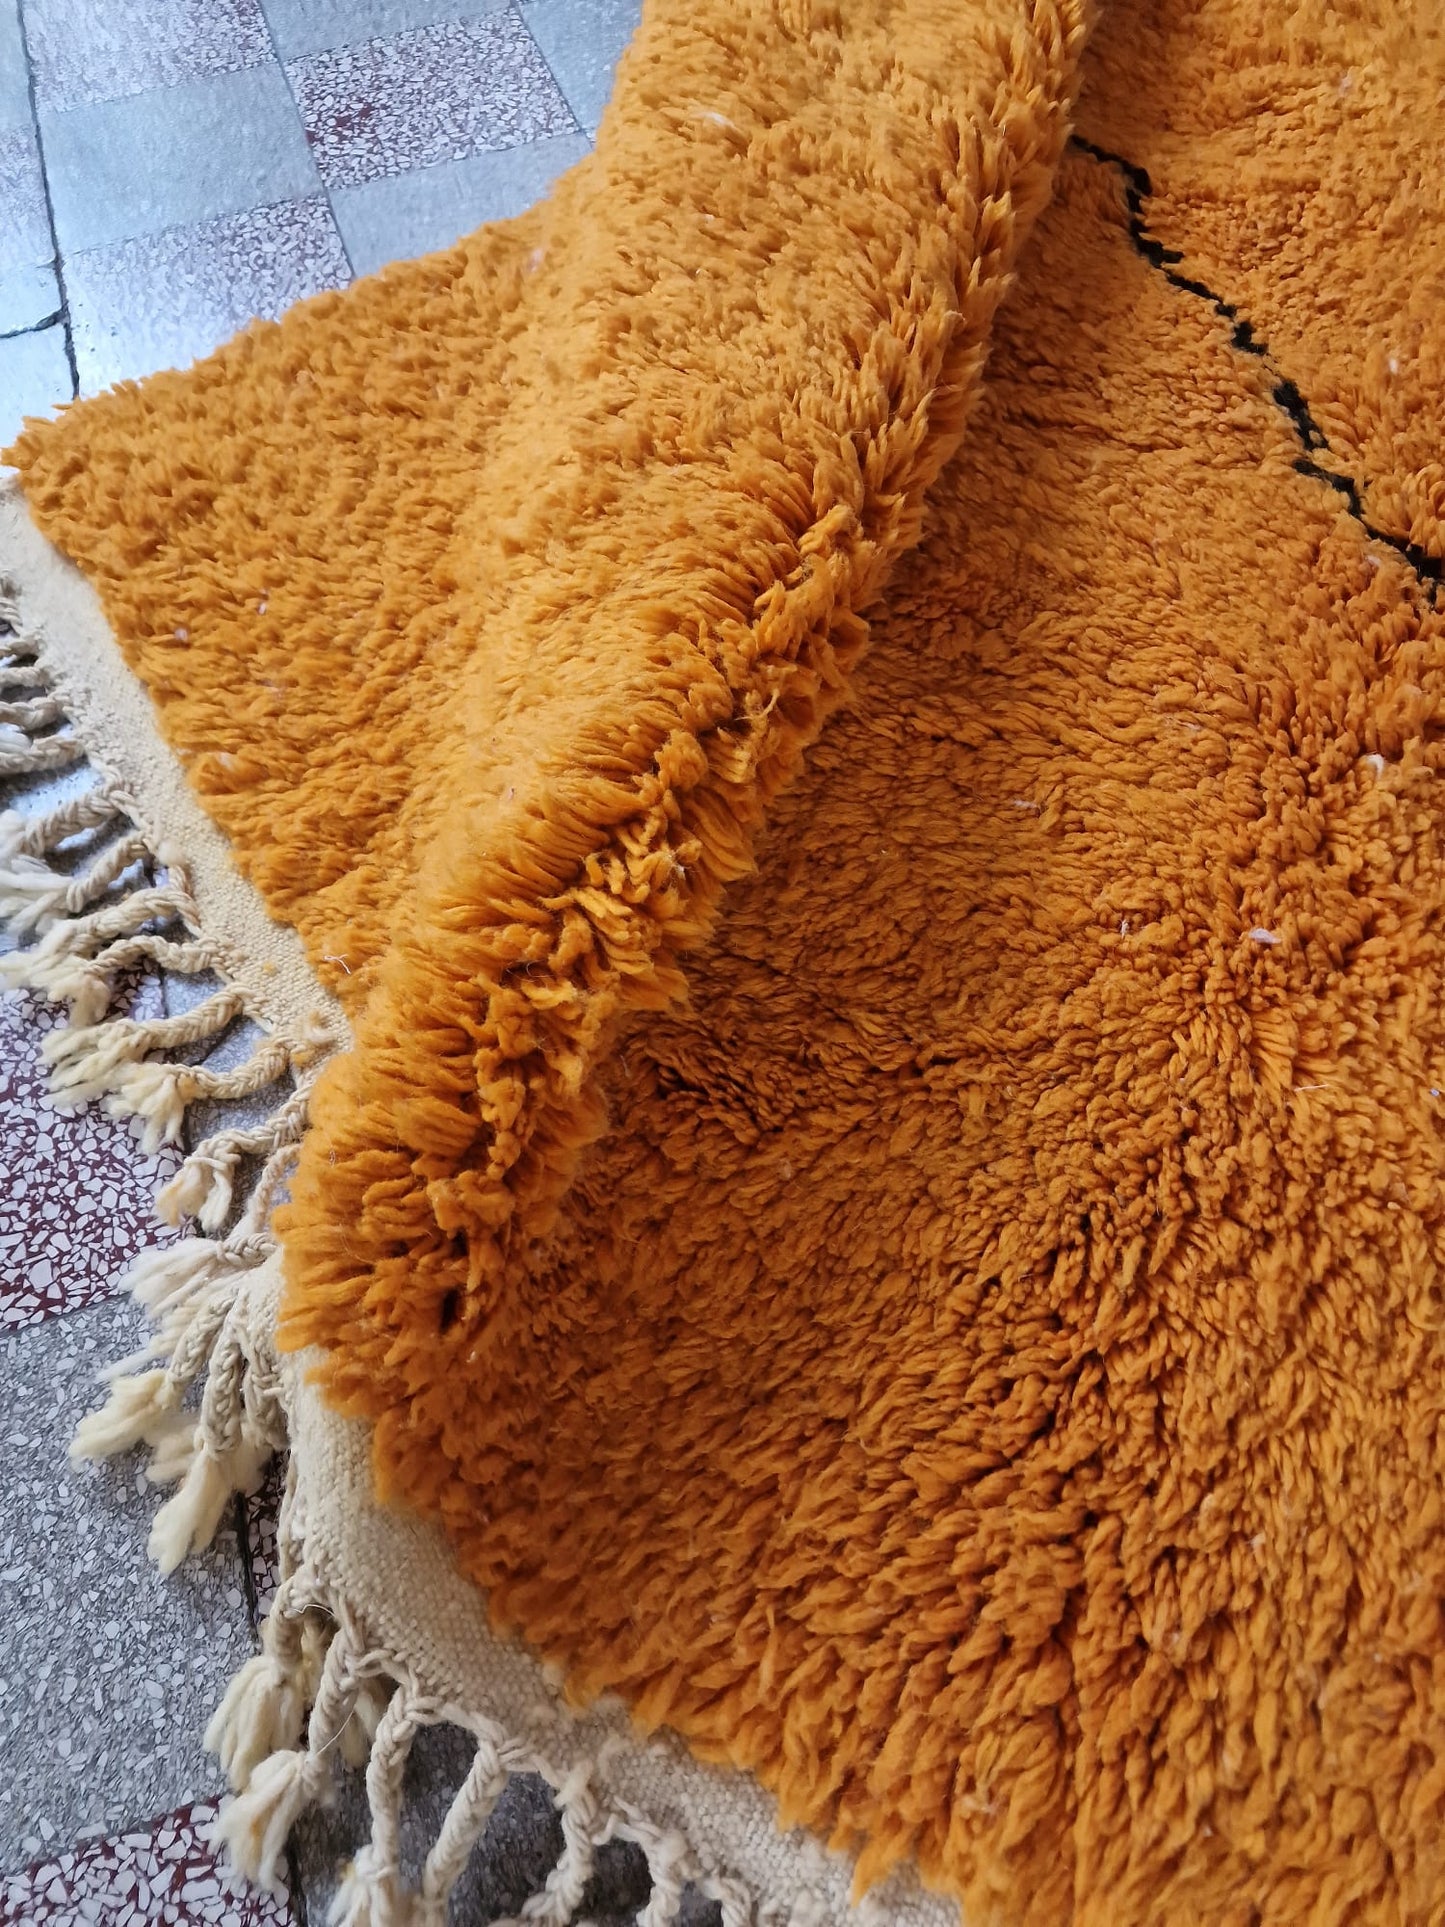 Order by Size: Moroccan Hanzo Rug